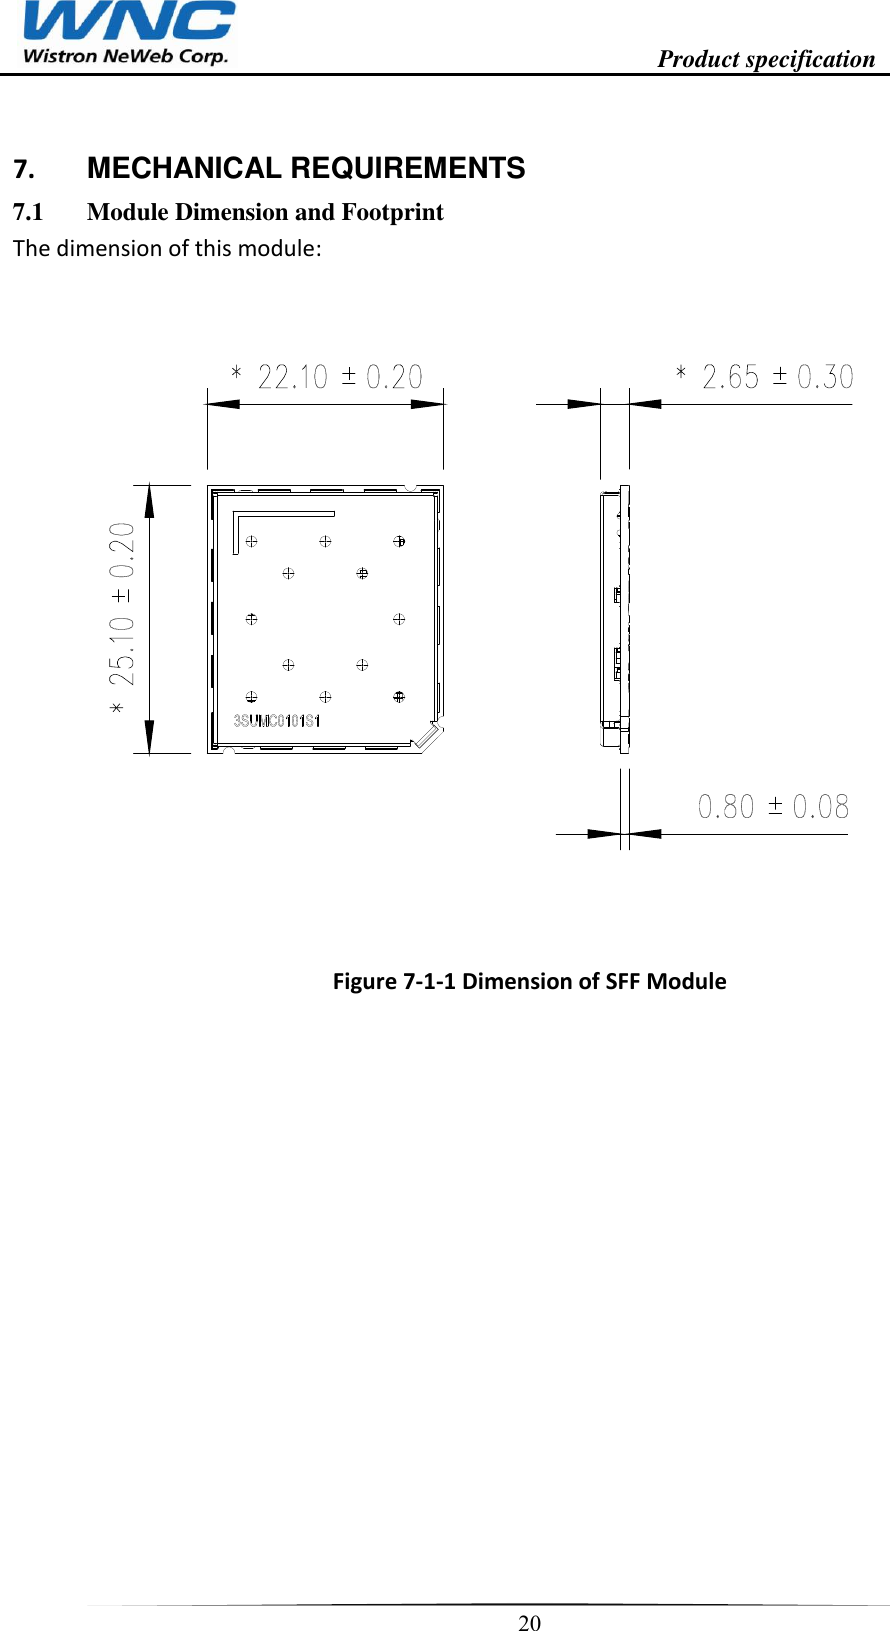                                                                    Product specification    20  7.  MECHANICAL REQUIREMENTS 7.1 Module Dimension and Footprint The dimension of this module:                   Figure 7-1-1 Dimension of SFF Module 